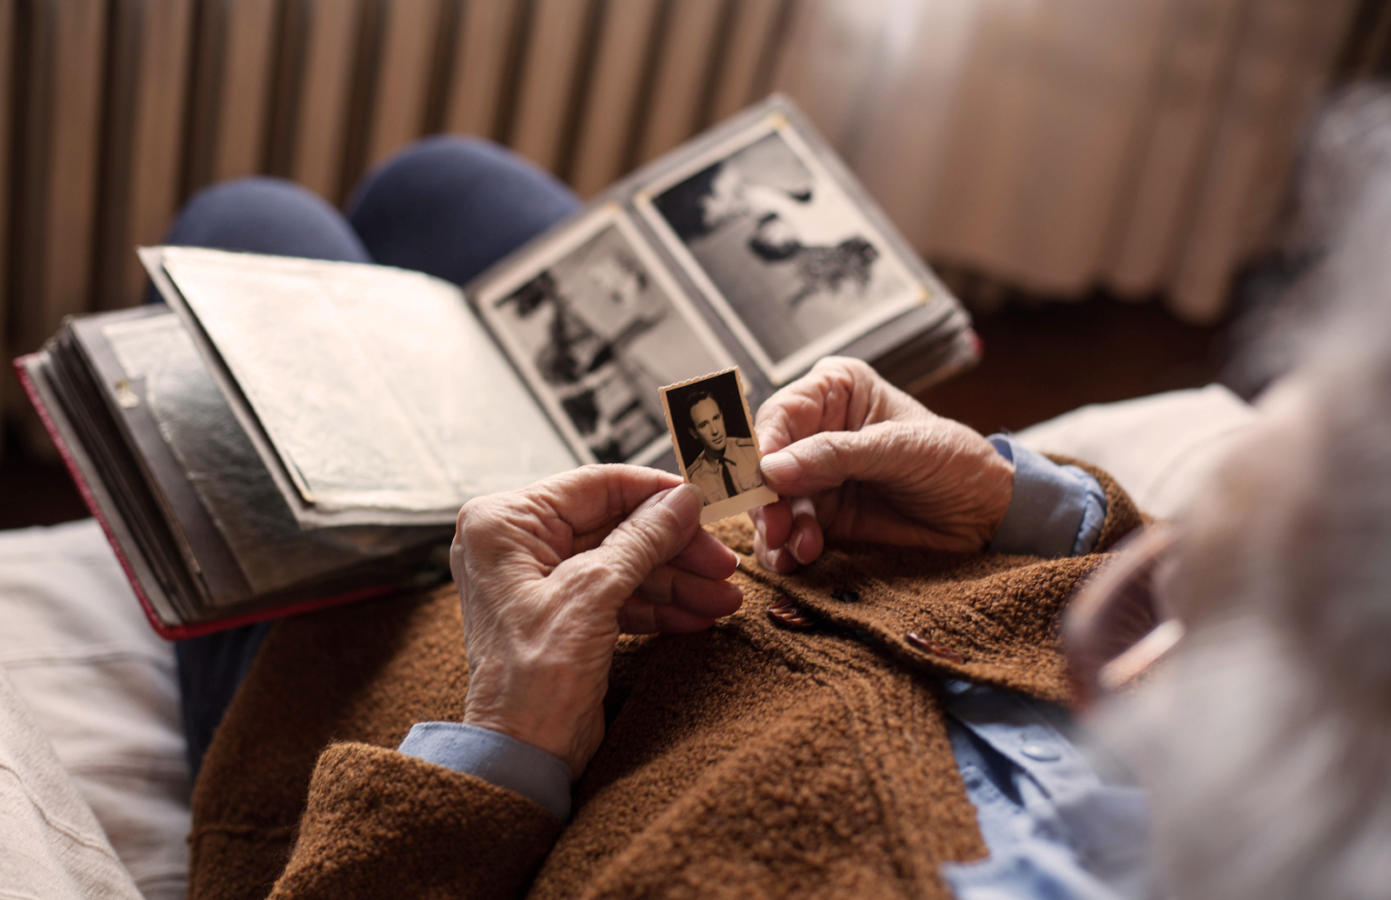 Senior adult woman looking at an old photo of her husband.